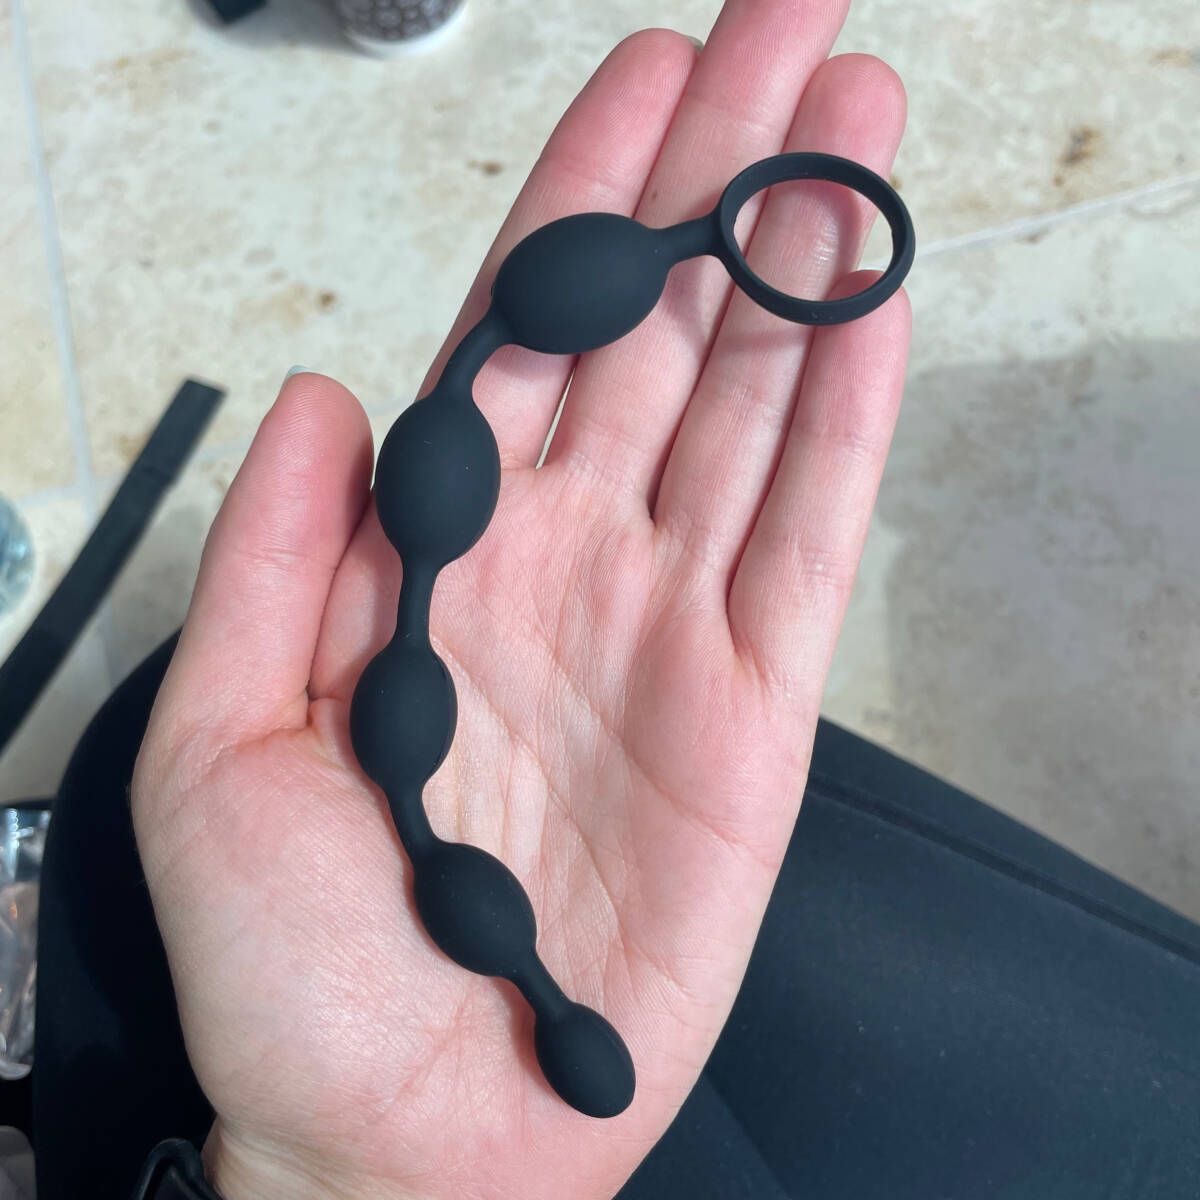 Image of palm holding low-tech sex toys silicone anal beads